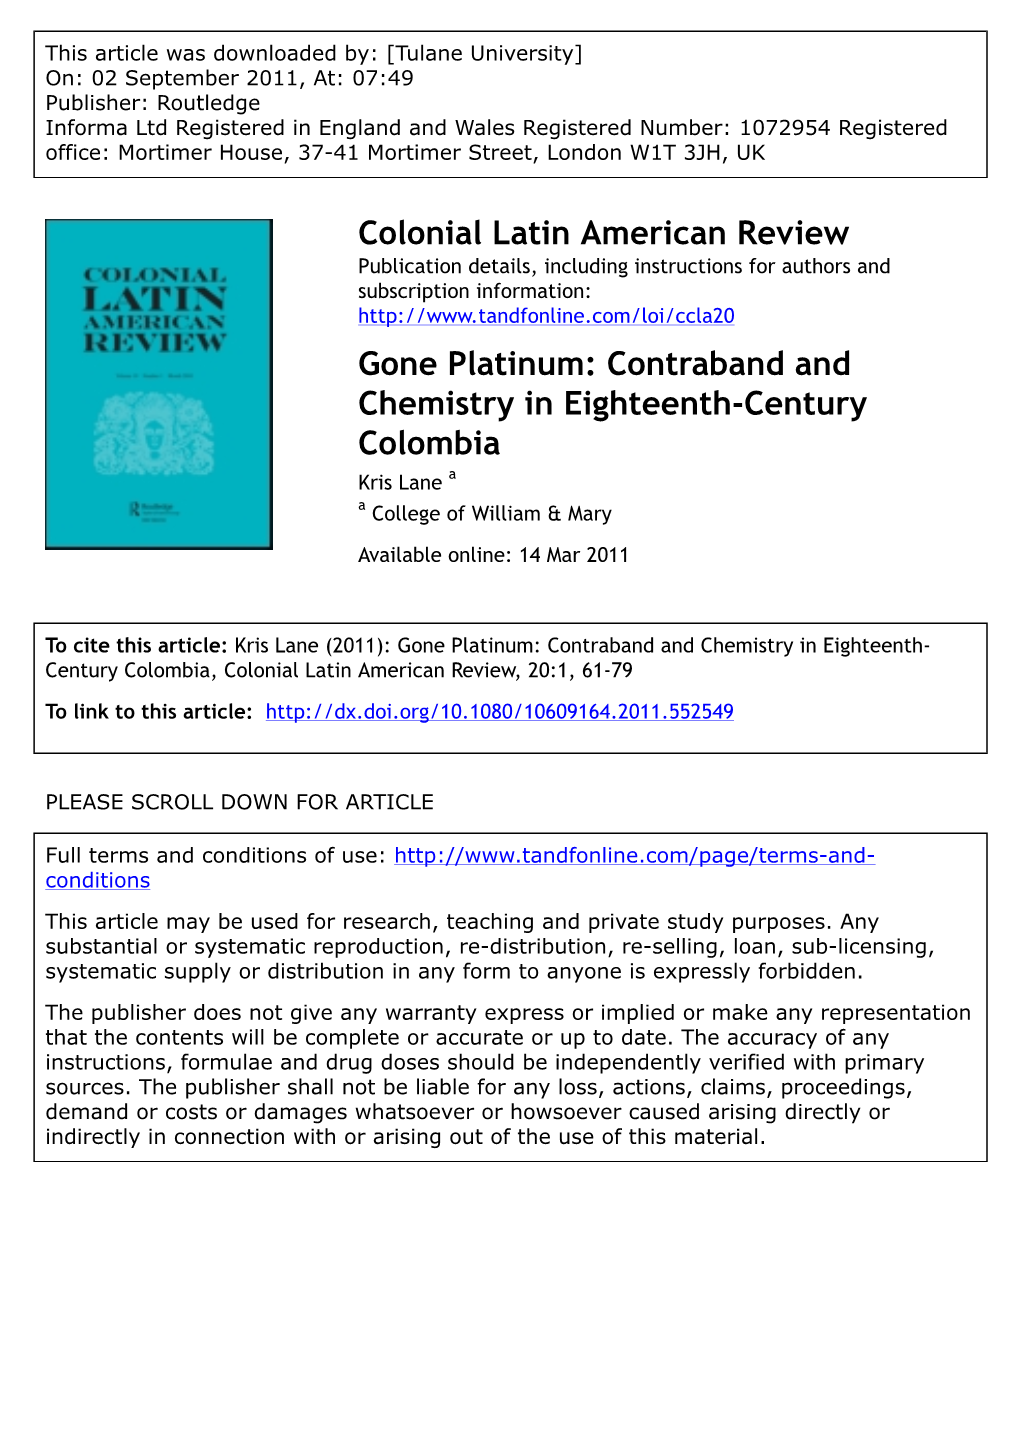 Gone Platinum: Contraband and Chemistry in Eighteenth-Century Colombia Kris Lane a a College of William & Mary Available Online: 14 Mar 2011